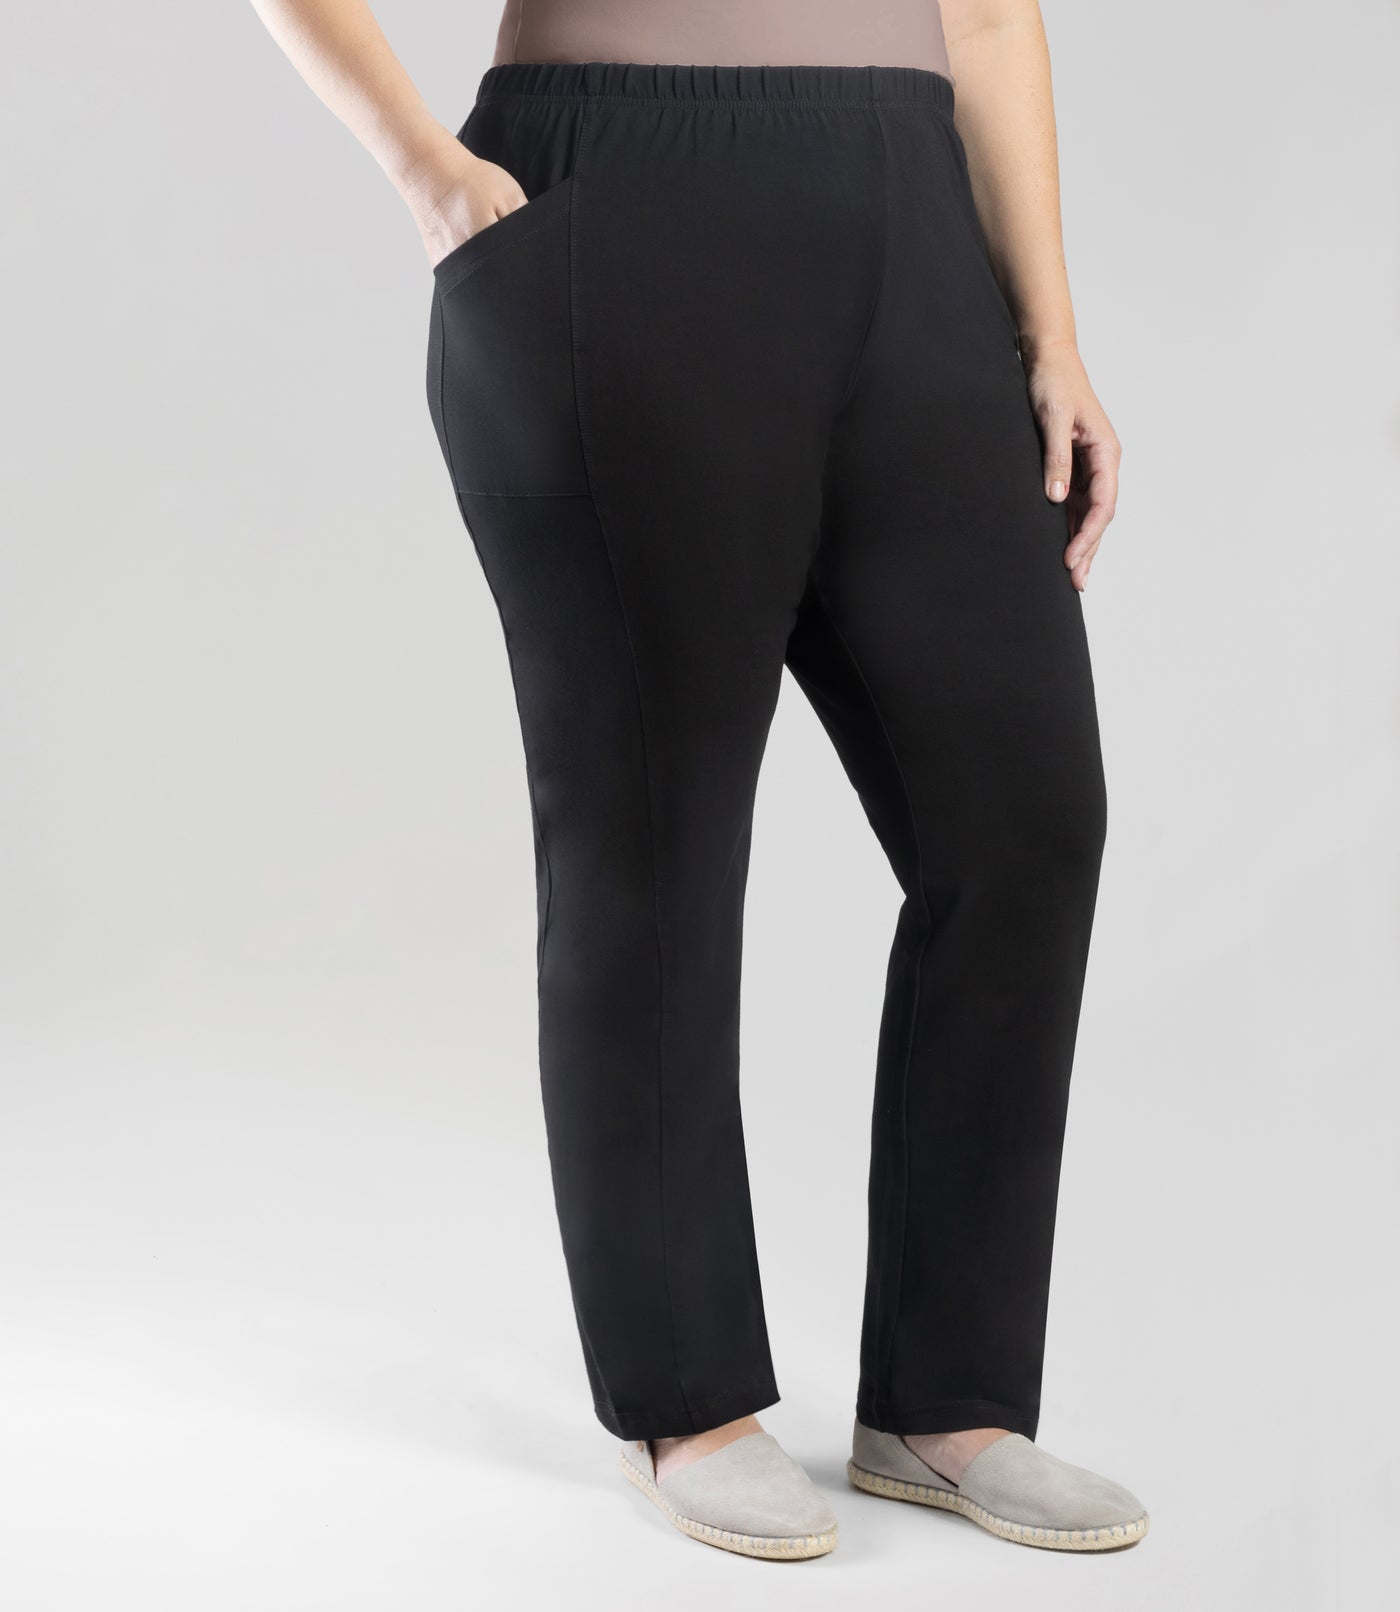 Bottom half of plus sized woman, front view, wearing JunoActive Stretch Naturals Side Pocket Loose Fit Leggings in color black. Bottom hem is at the ankle